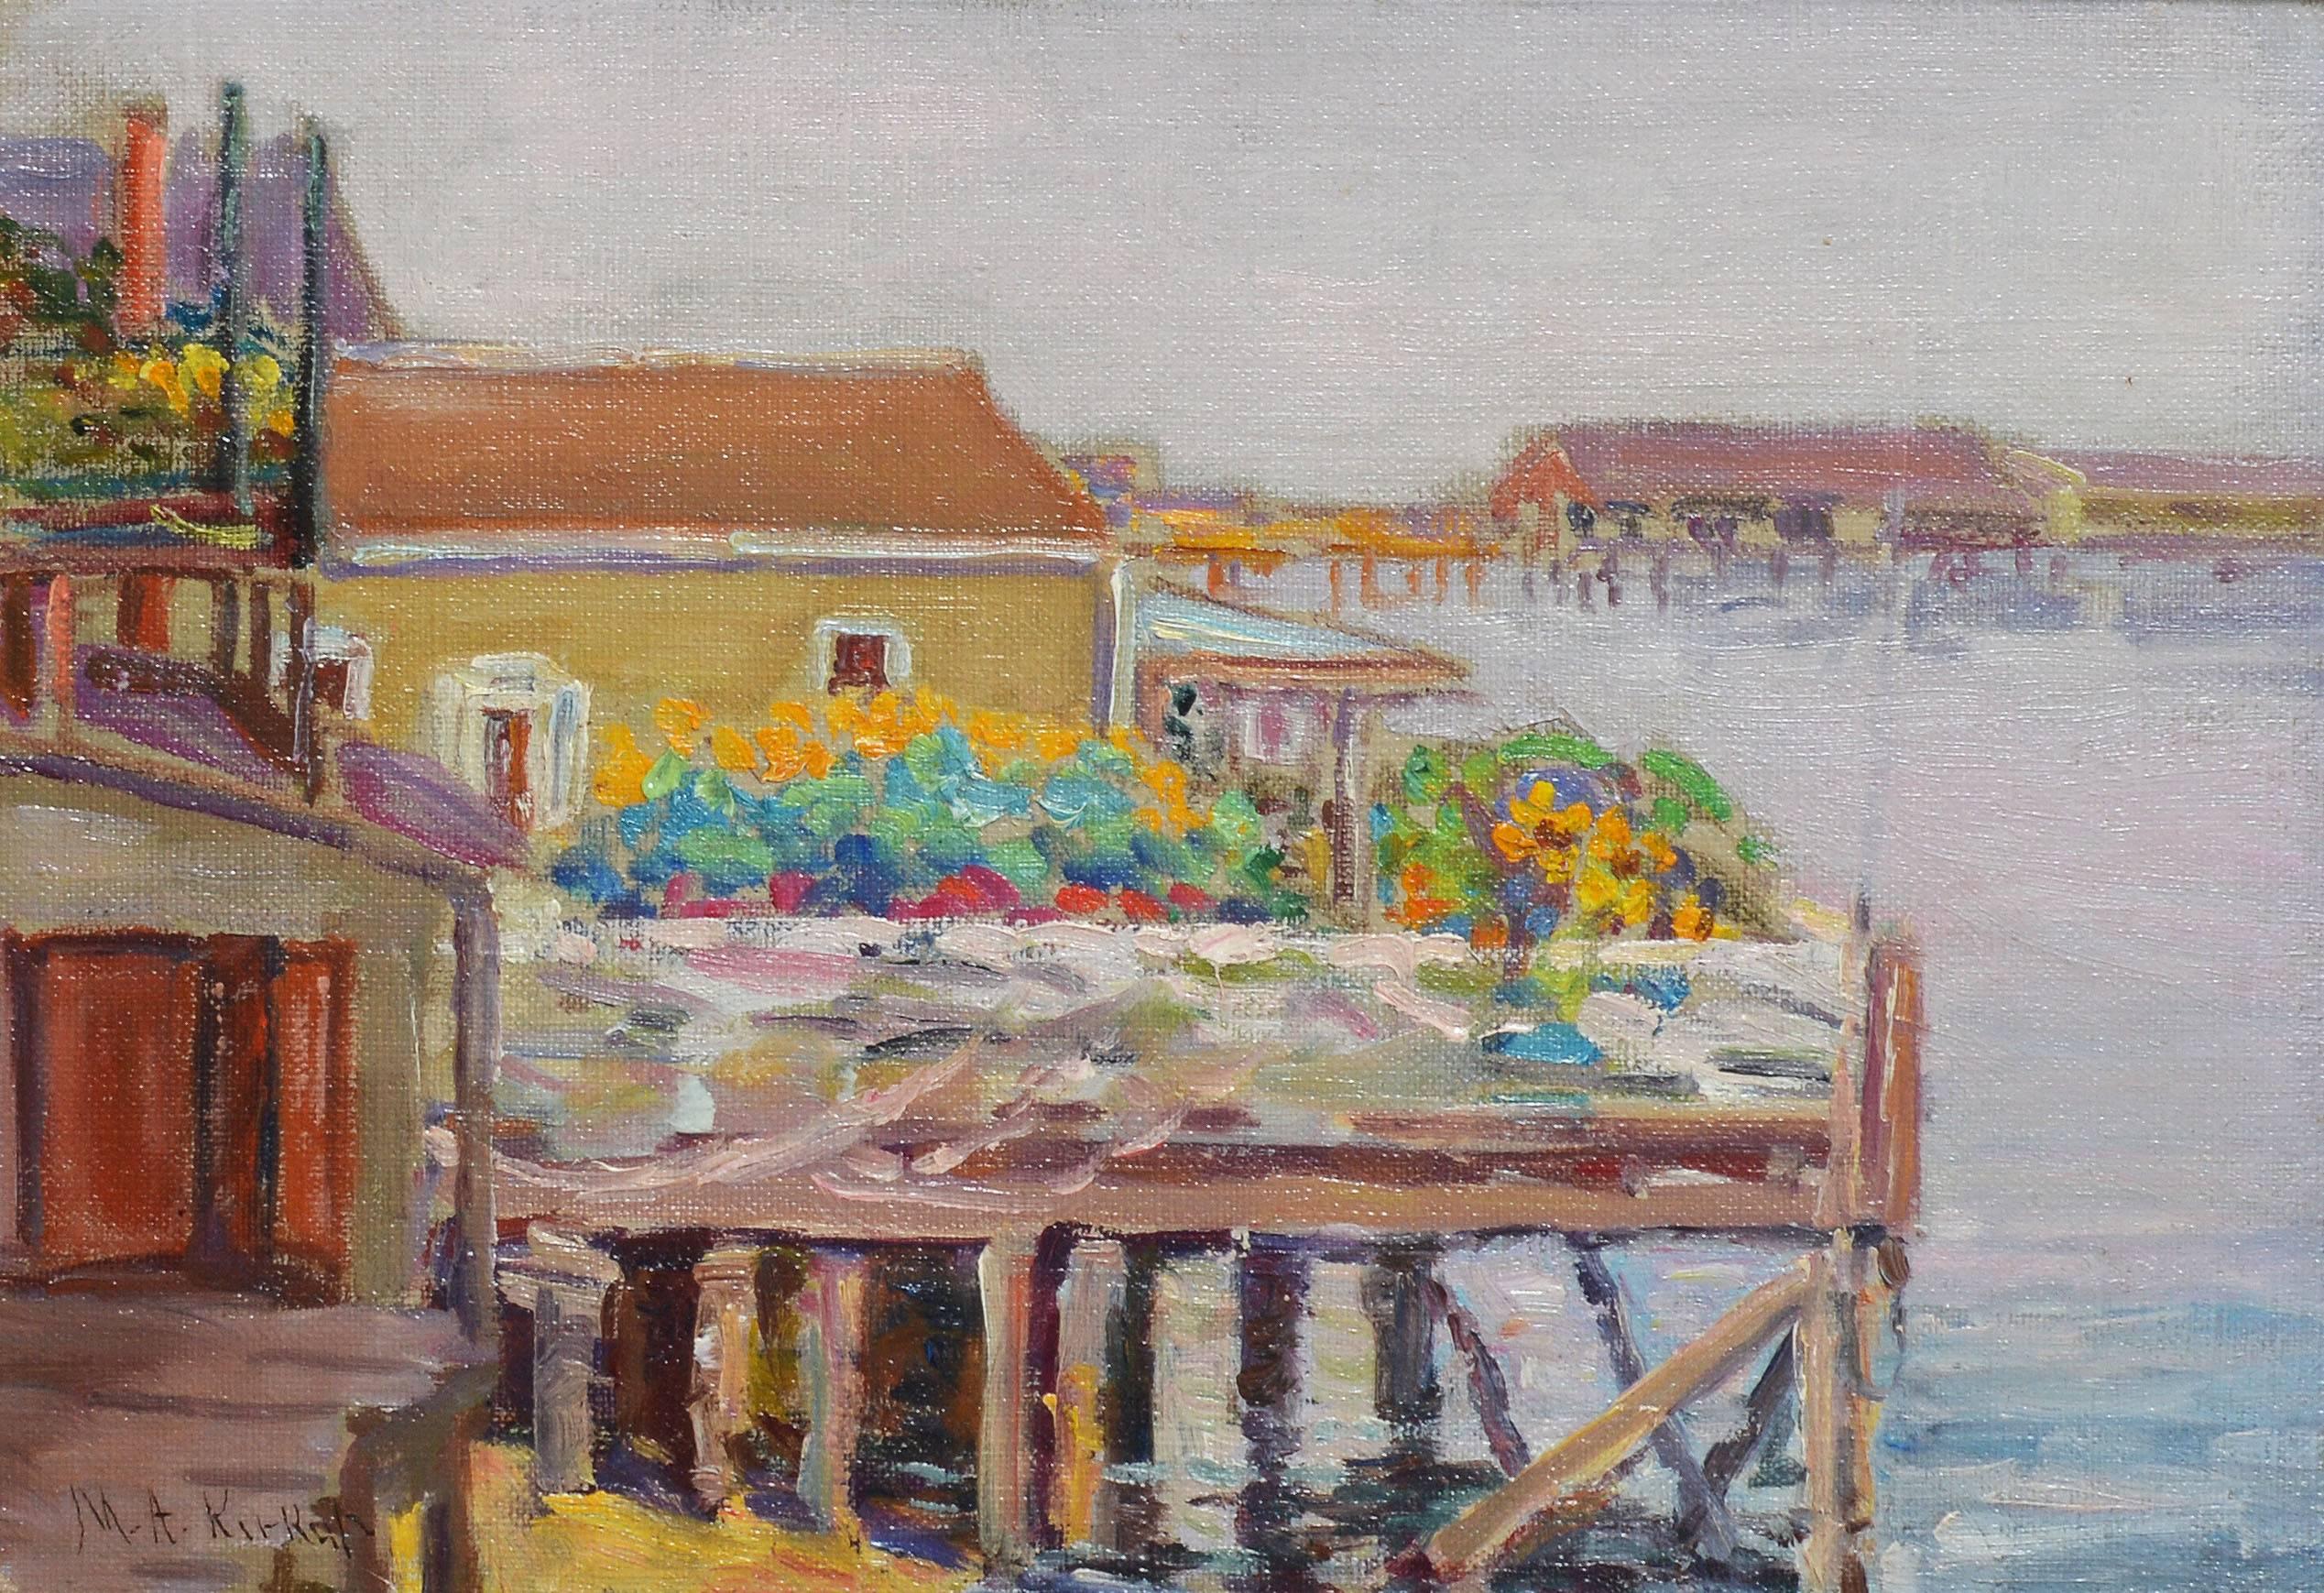 New England Harbor by Mary Kirkup - Impressionist Painting by Mary A. Kirkup